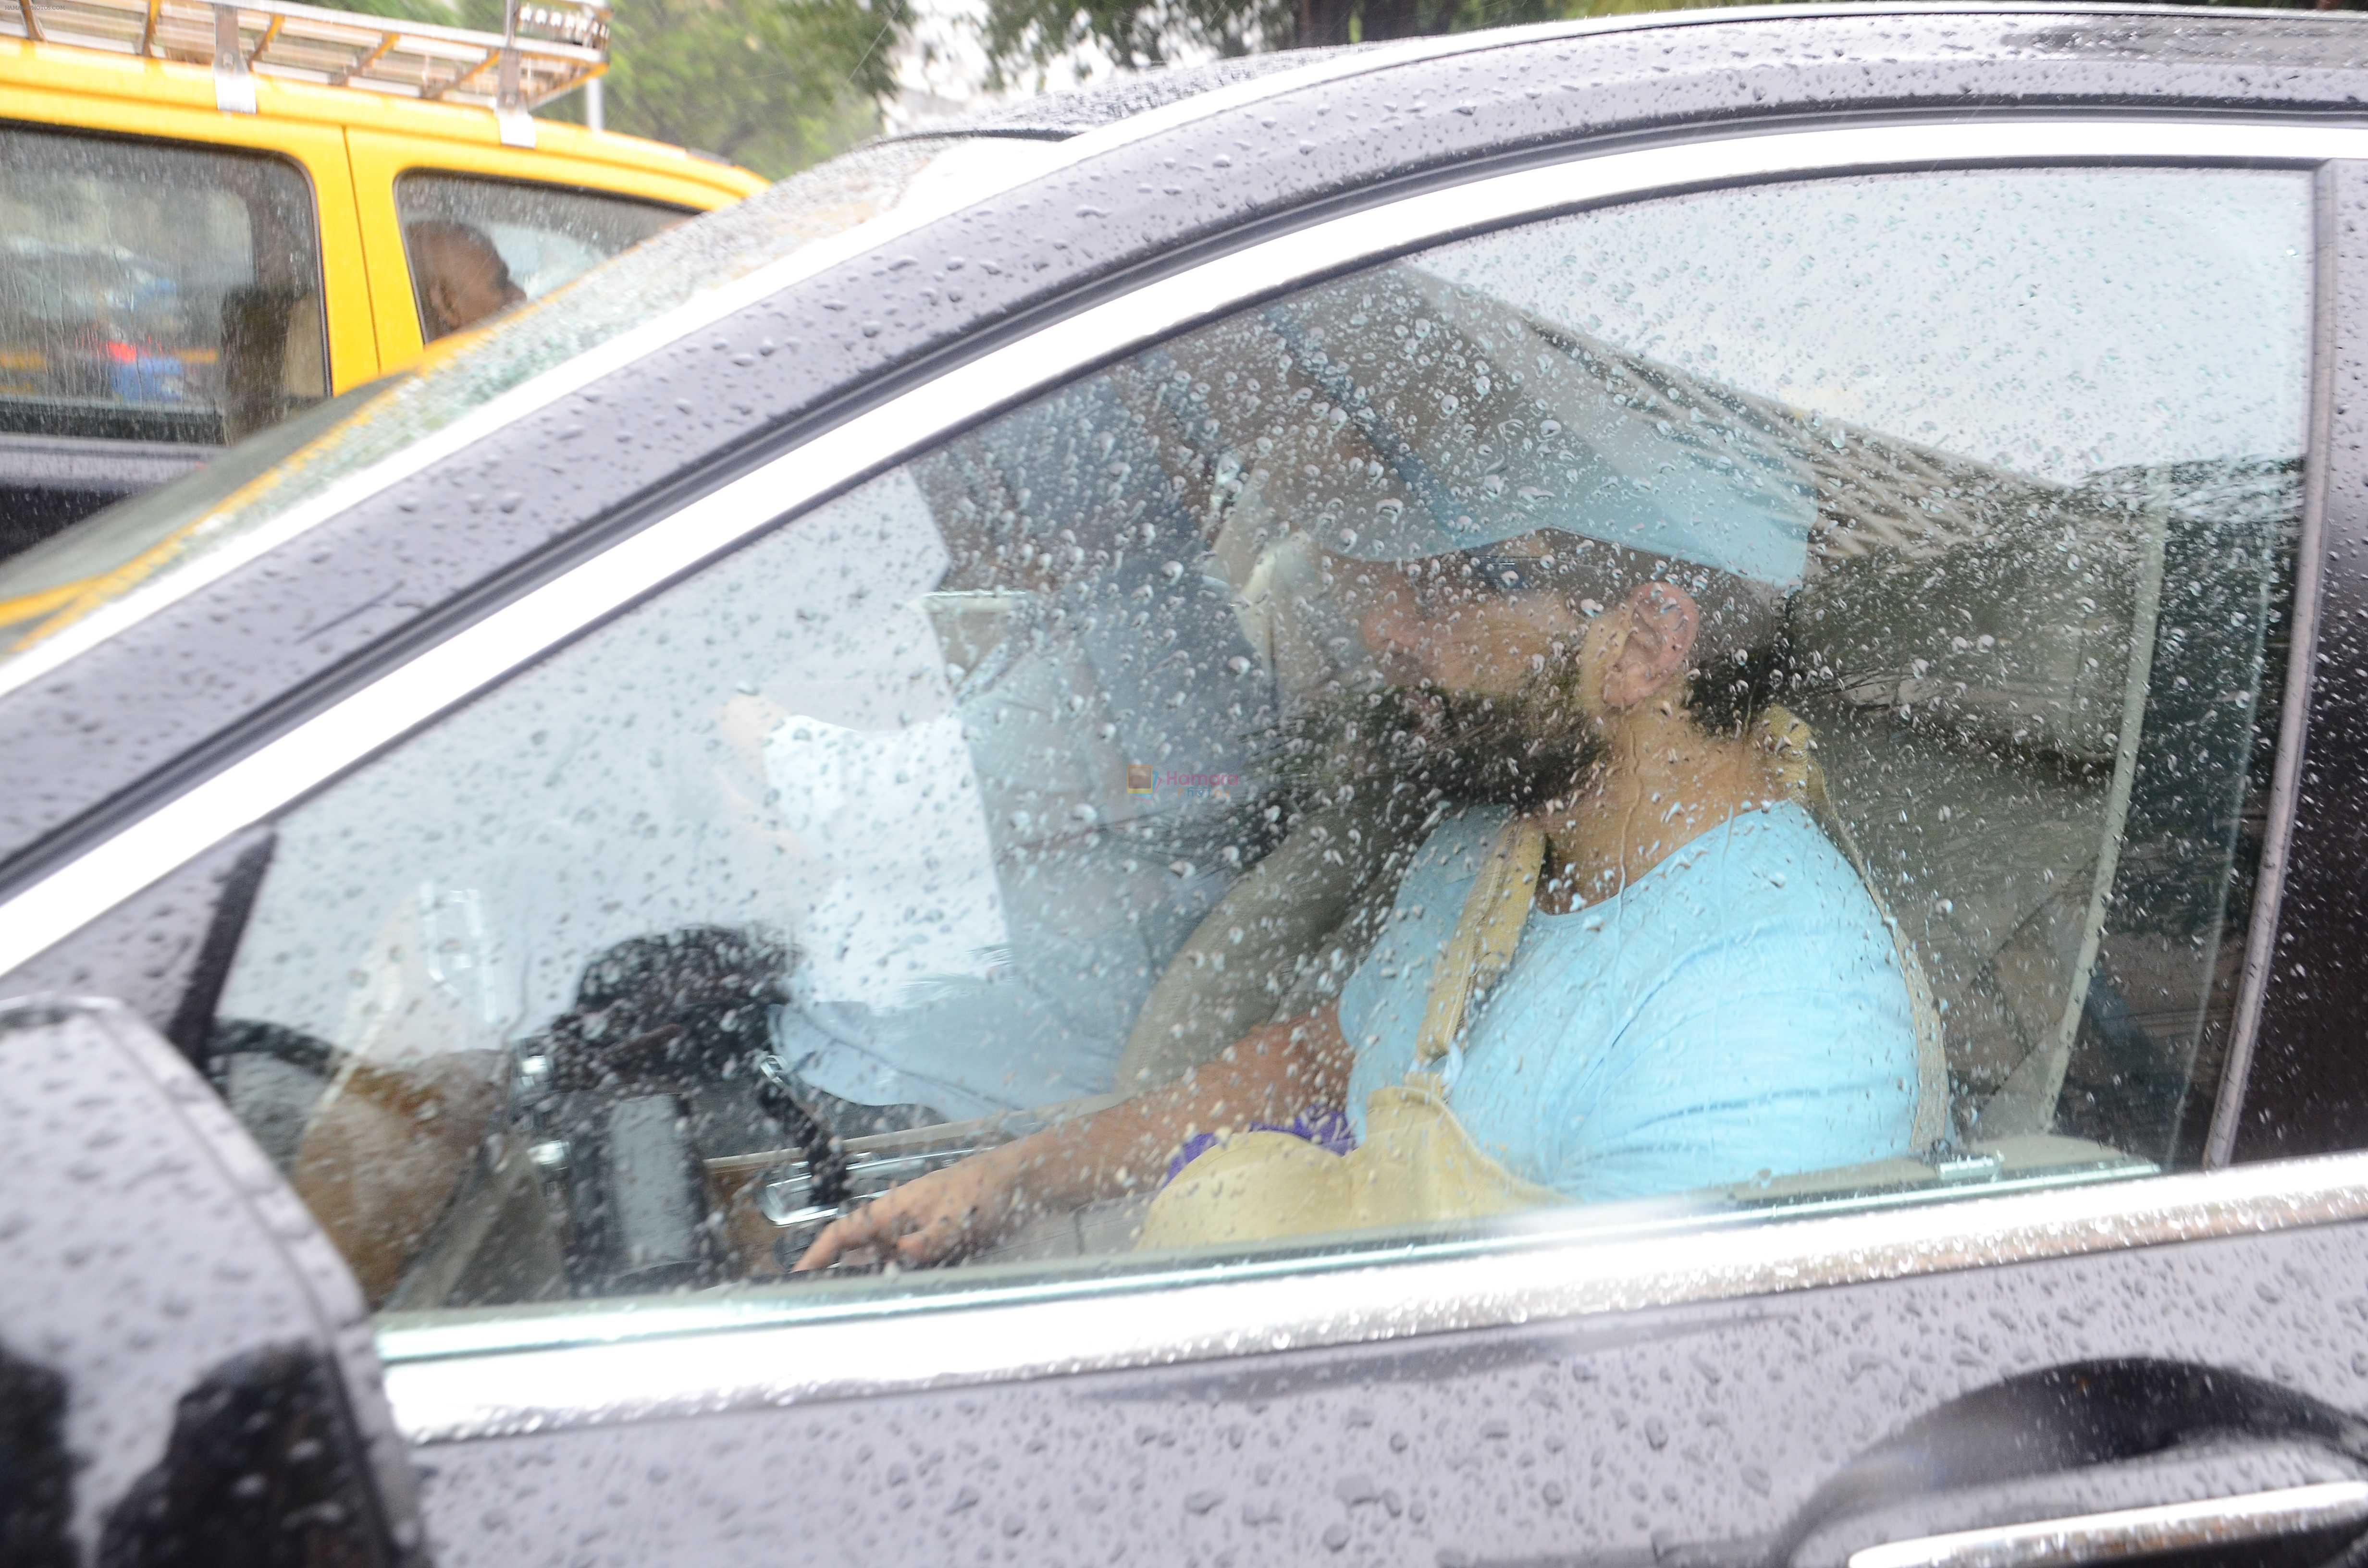 Saif Ali Khan discharged from hospital on 27th June 2016